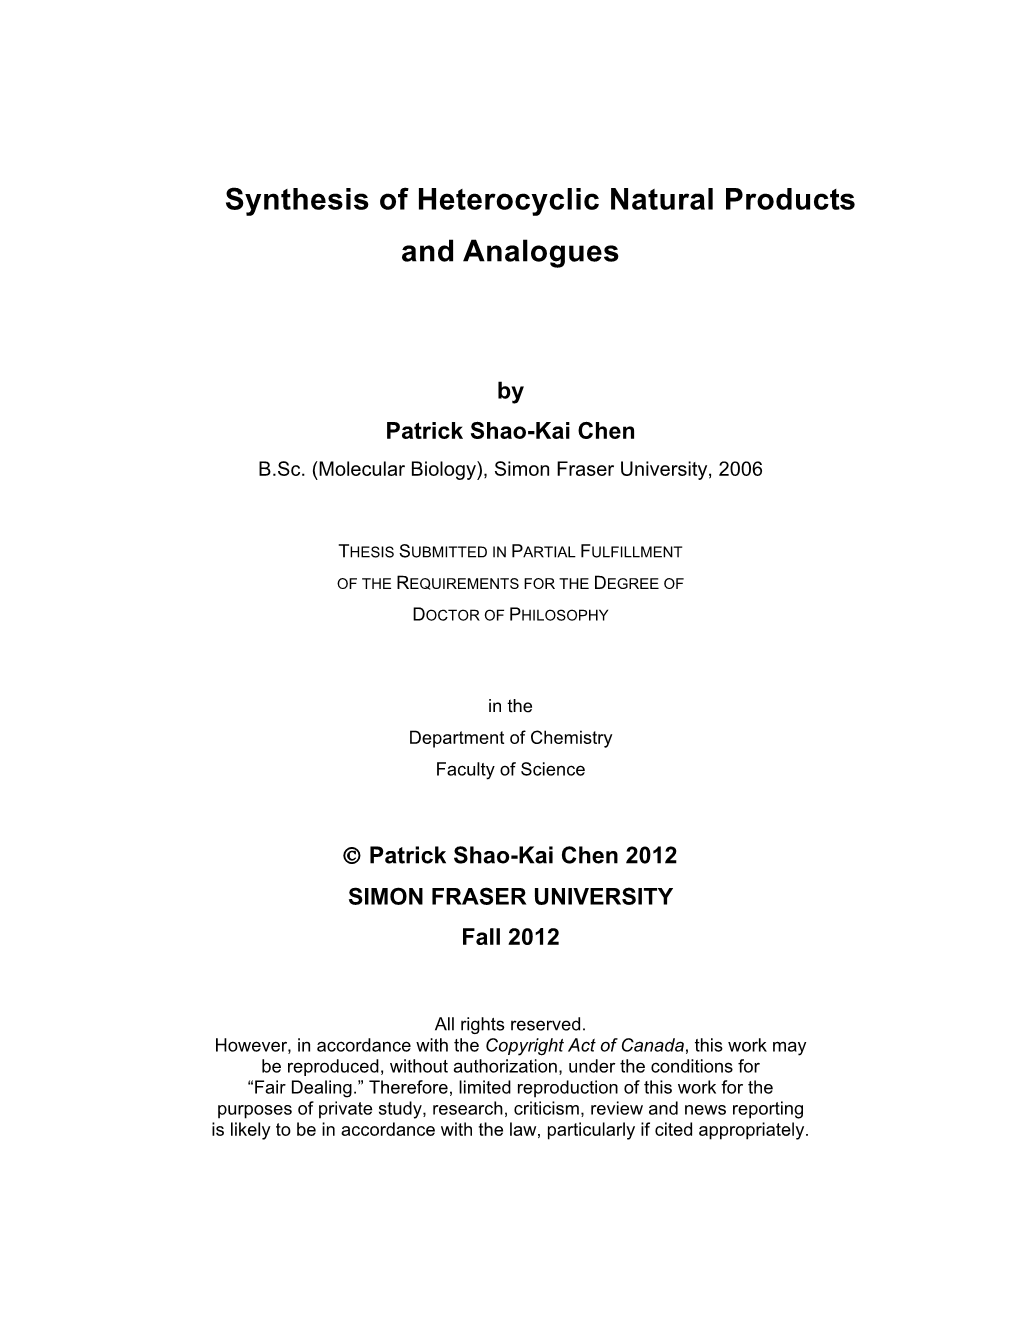 Synthesis of Heterocyclic Natural Products and Analogues